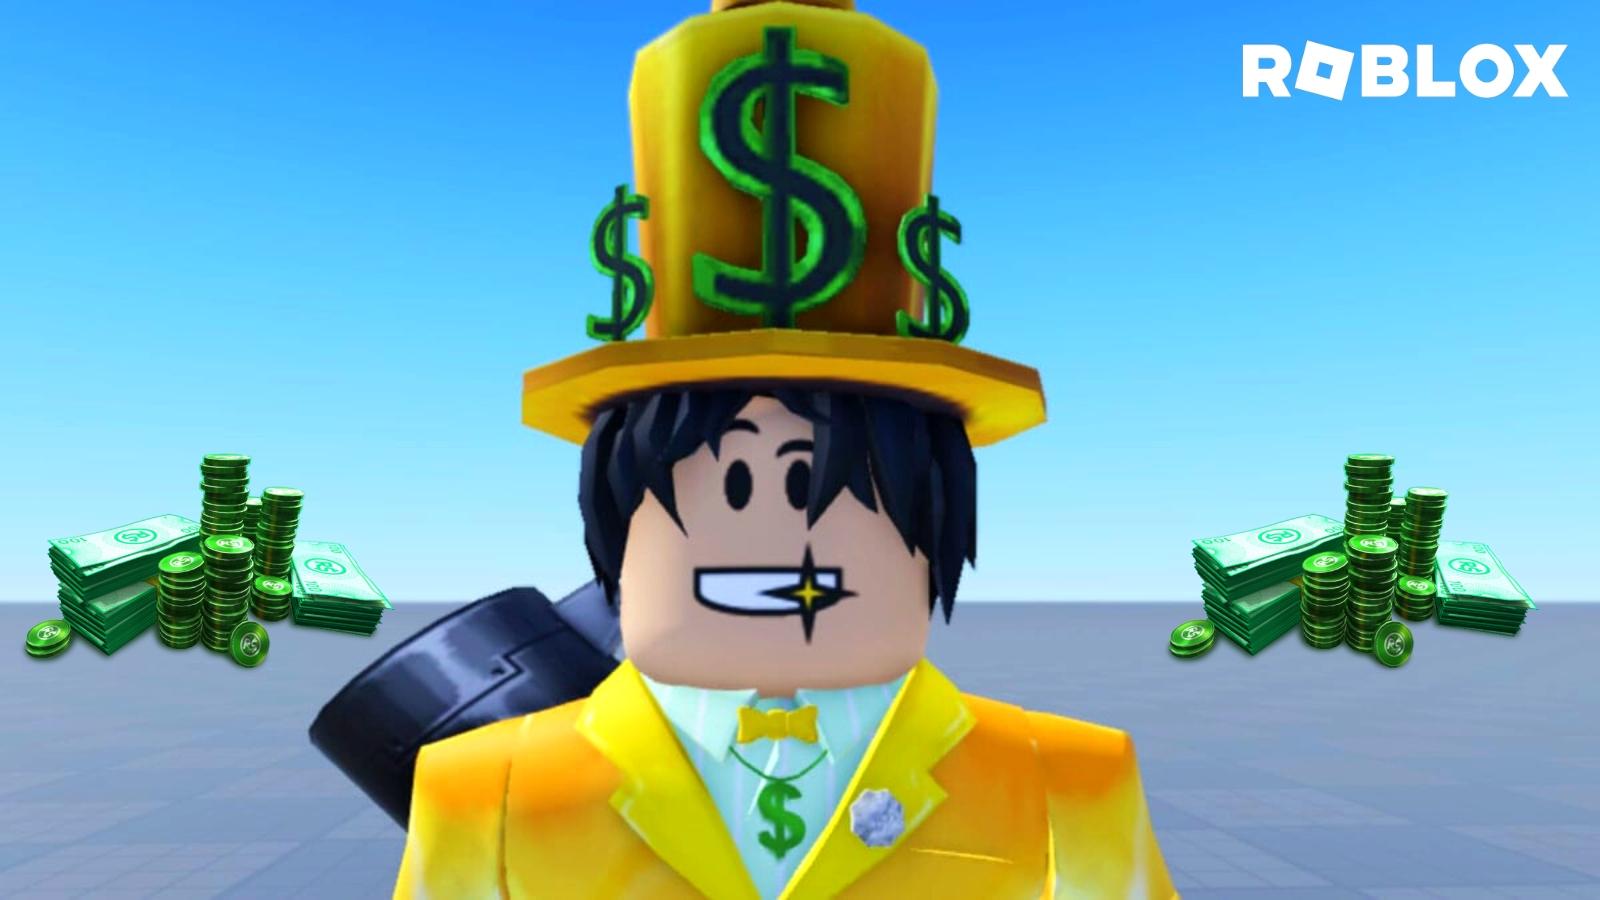 robux sign - Roblox